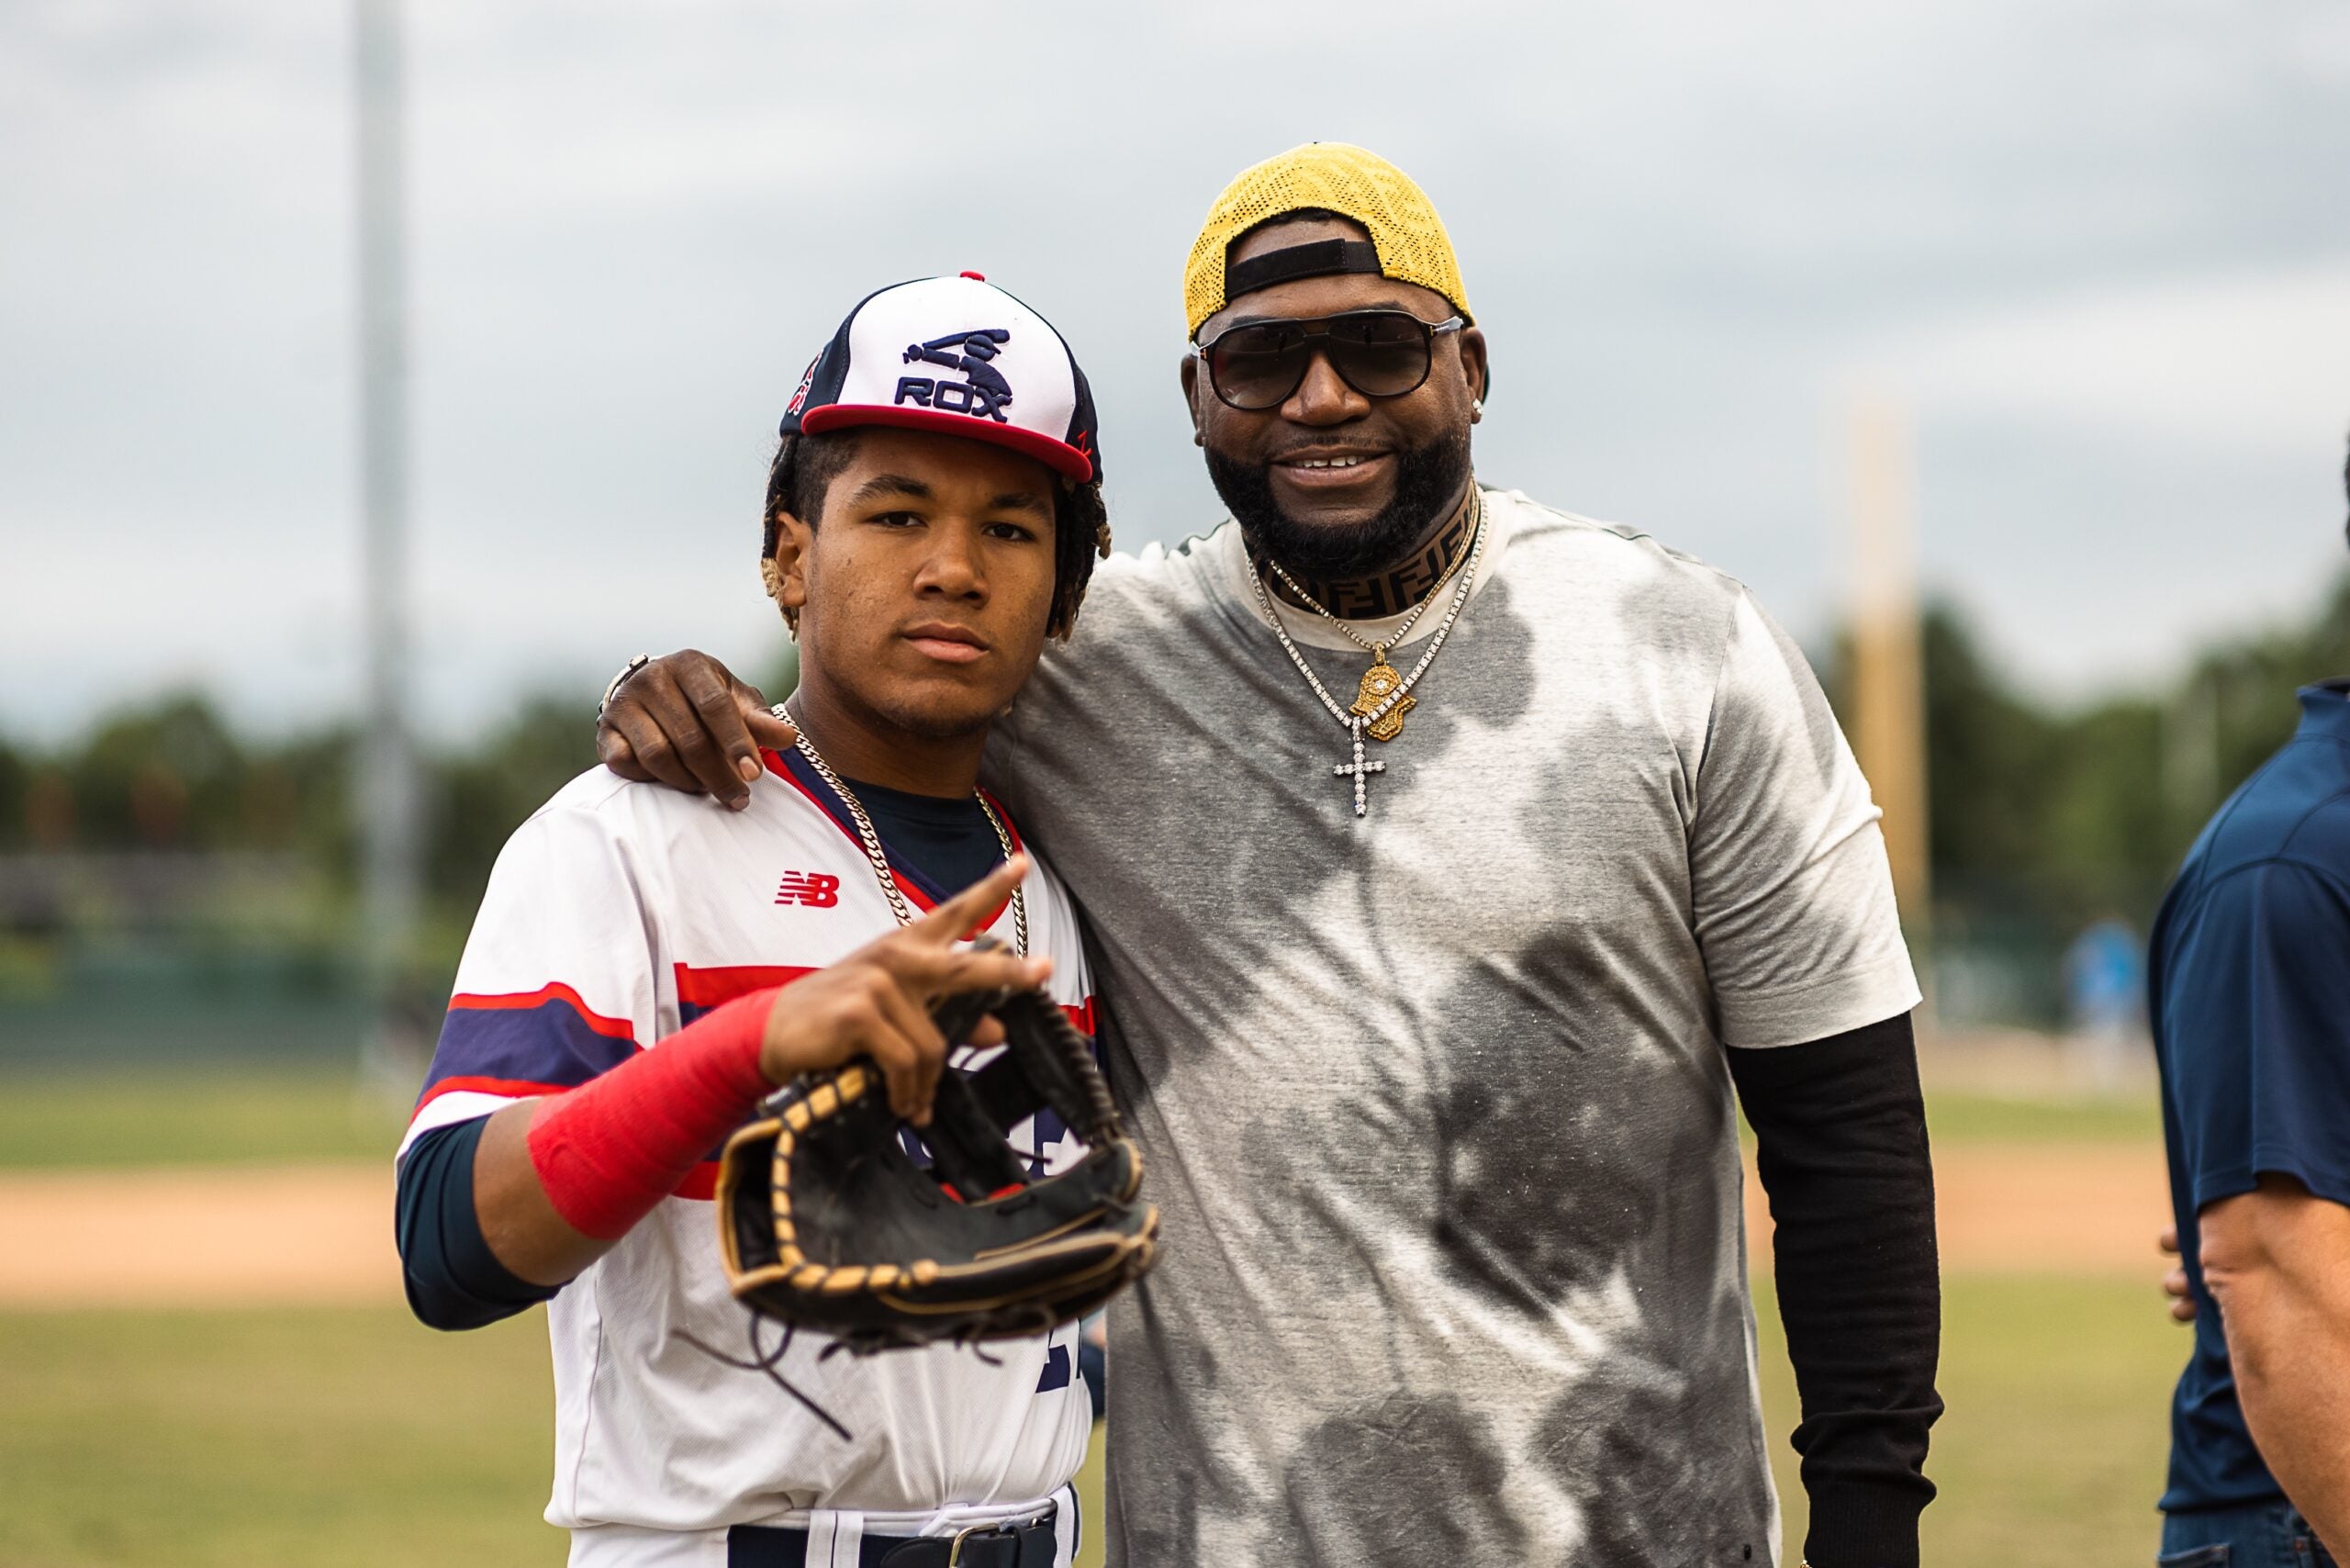 Talkin' Baseball on X: David Ortiz and Manny Ramirez spent Father's Day  watching their kids play for the Brockton Rox, a collegiate summer league  team in Massachusetts  / X